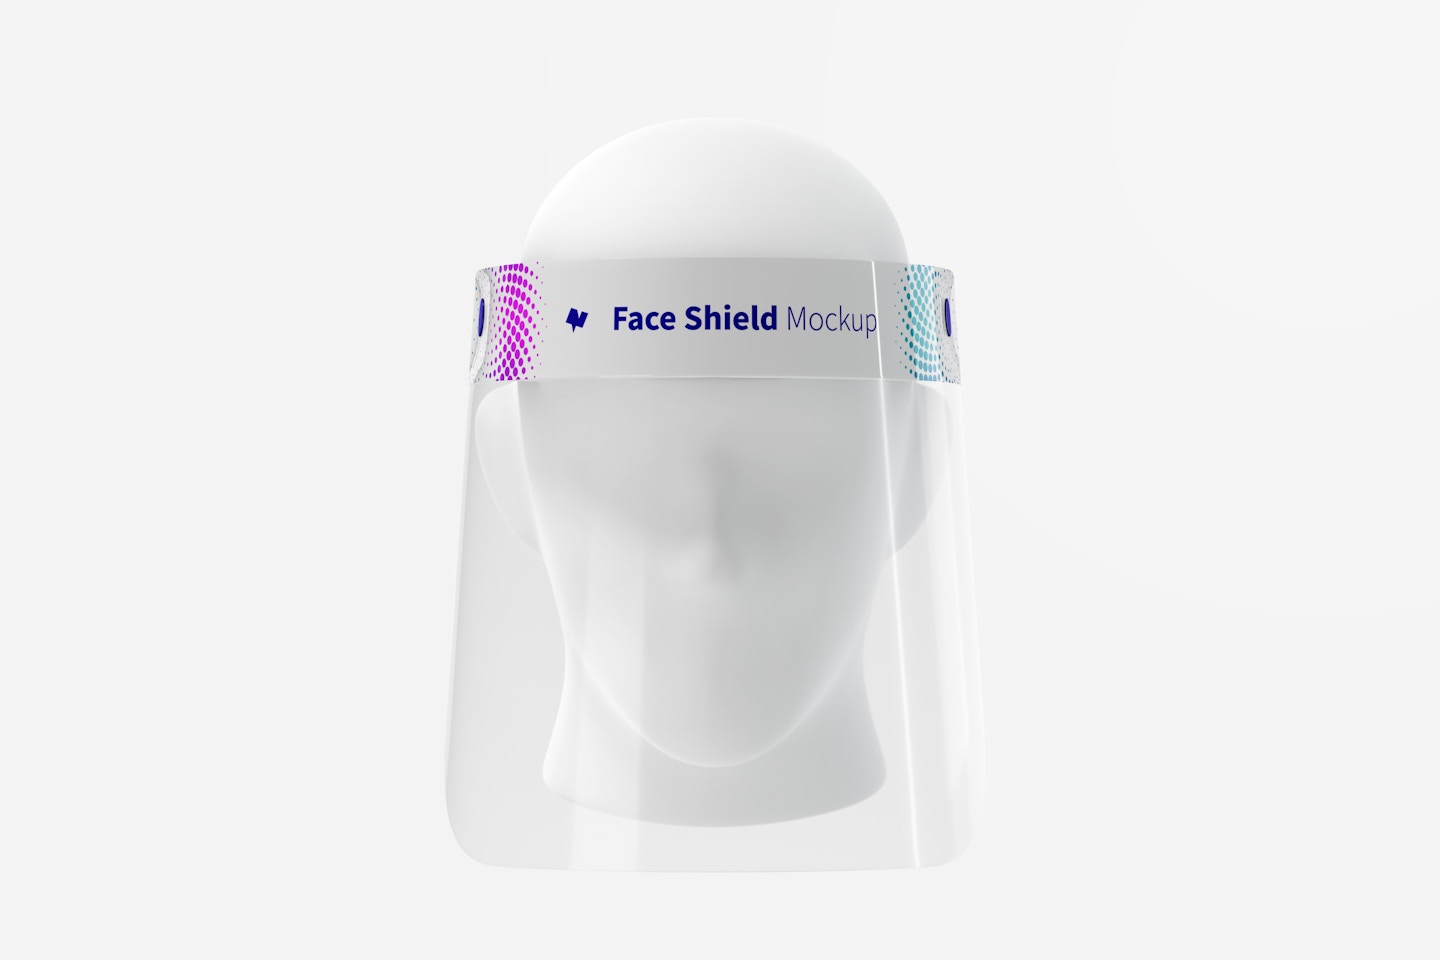 Face Shield with Head Mockup, Front View